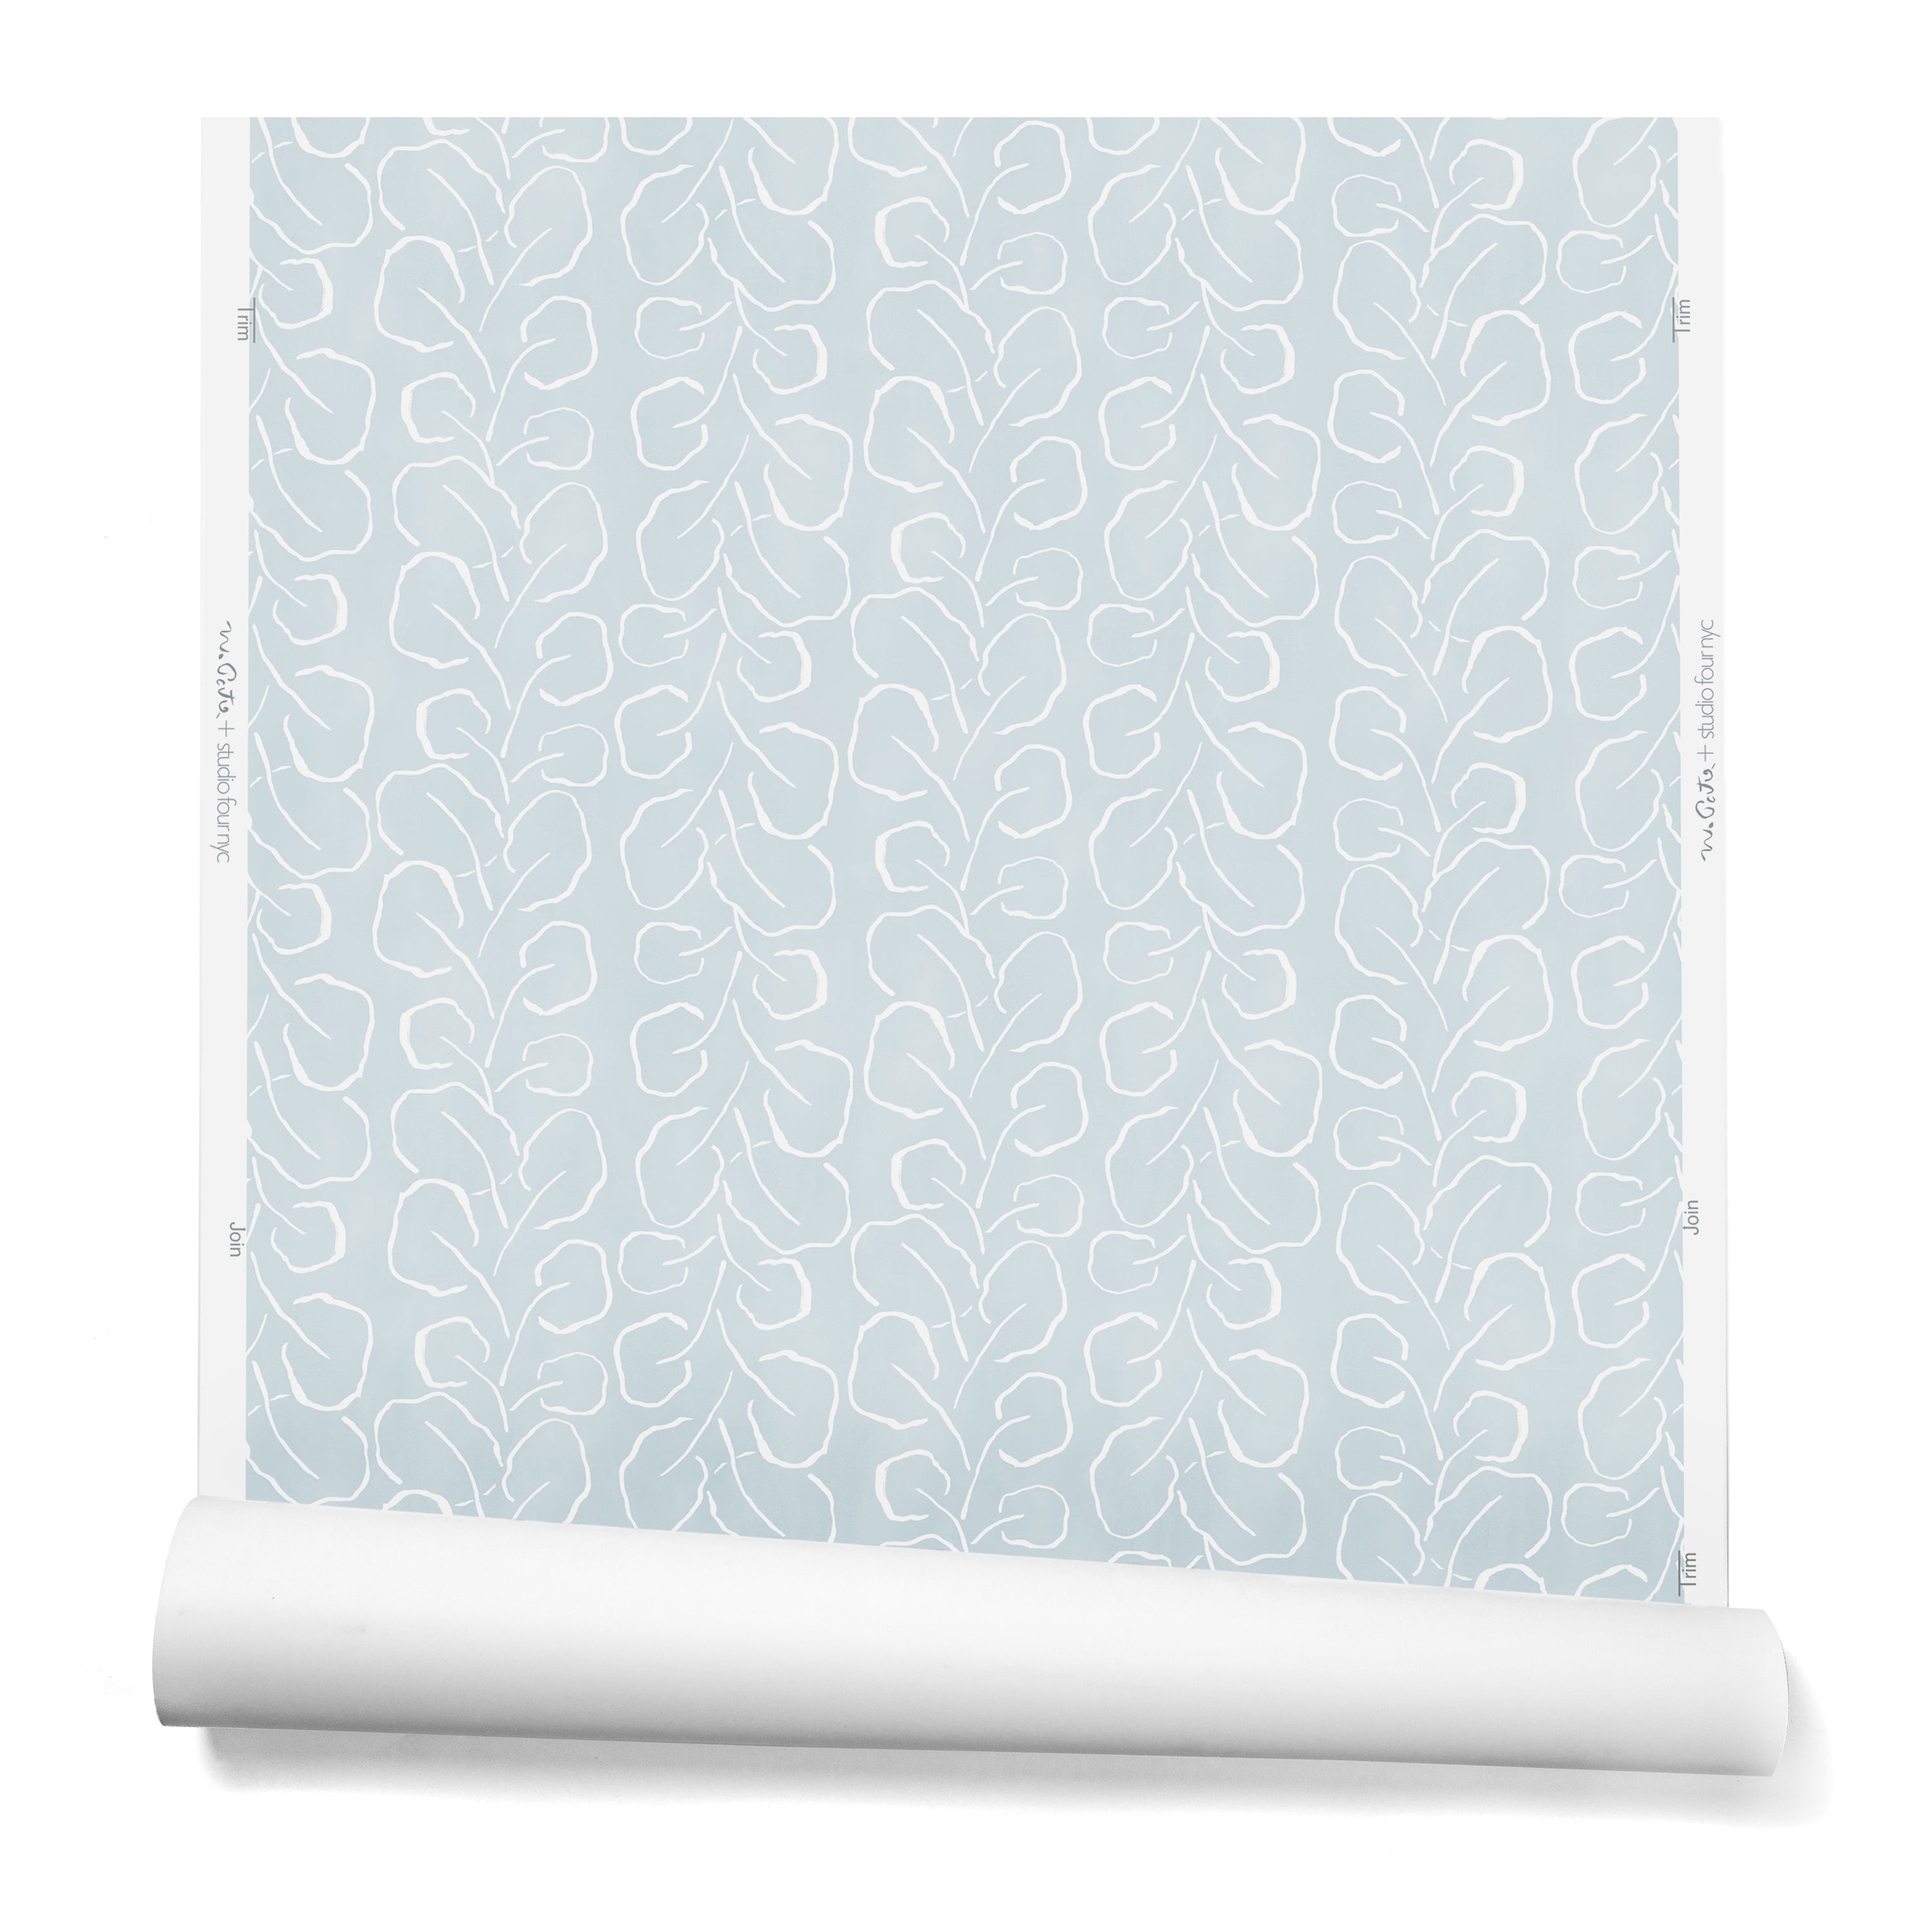 A hanging roll of wallpaper with a large-scale repeating leaf print in white on a light blue watercolor background.